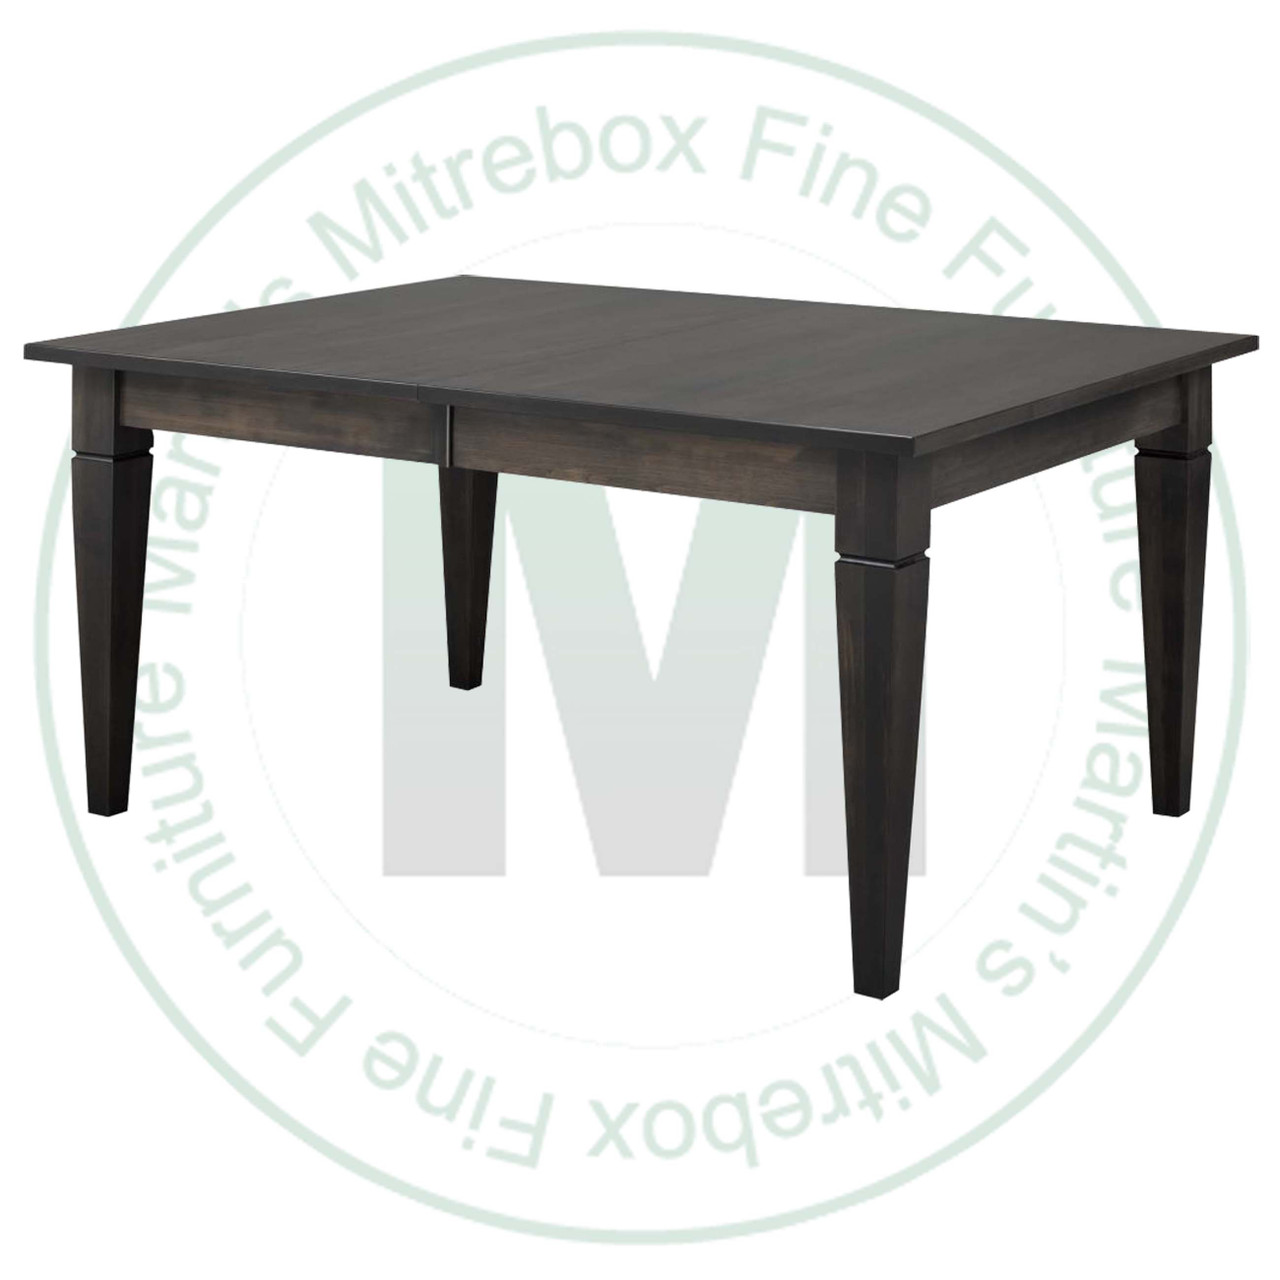 Maple Reesor Extension Harvest Table 48''D x 60''W x 30''H With 2 - 12'' Leaves Table Has 1.25'' Thick Top